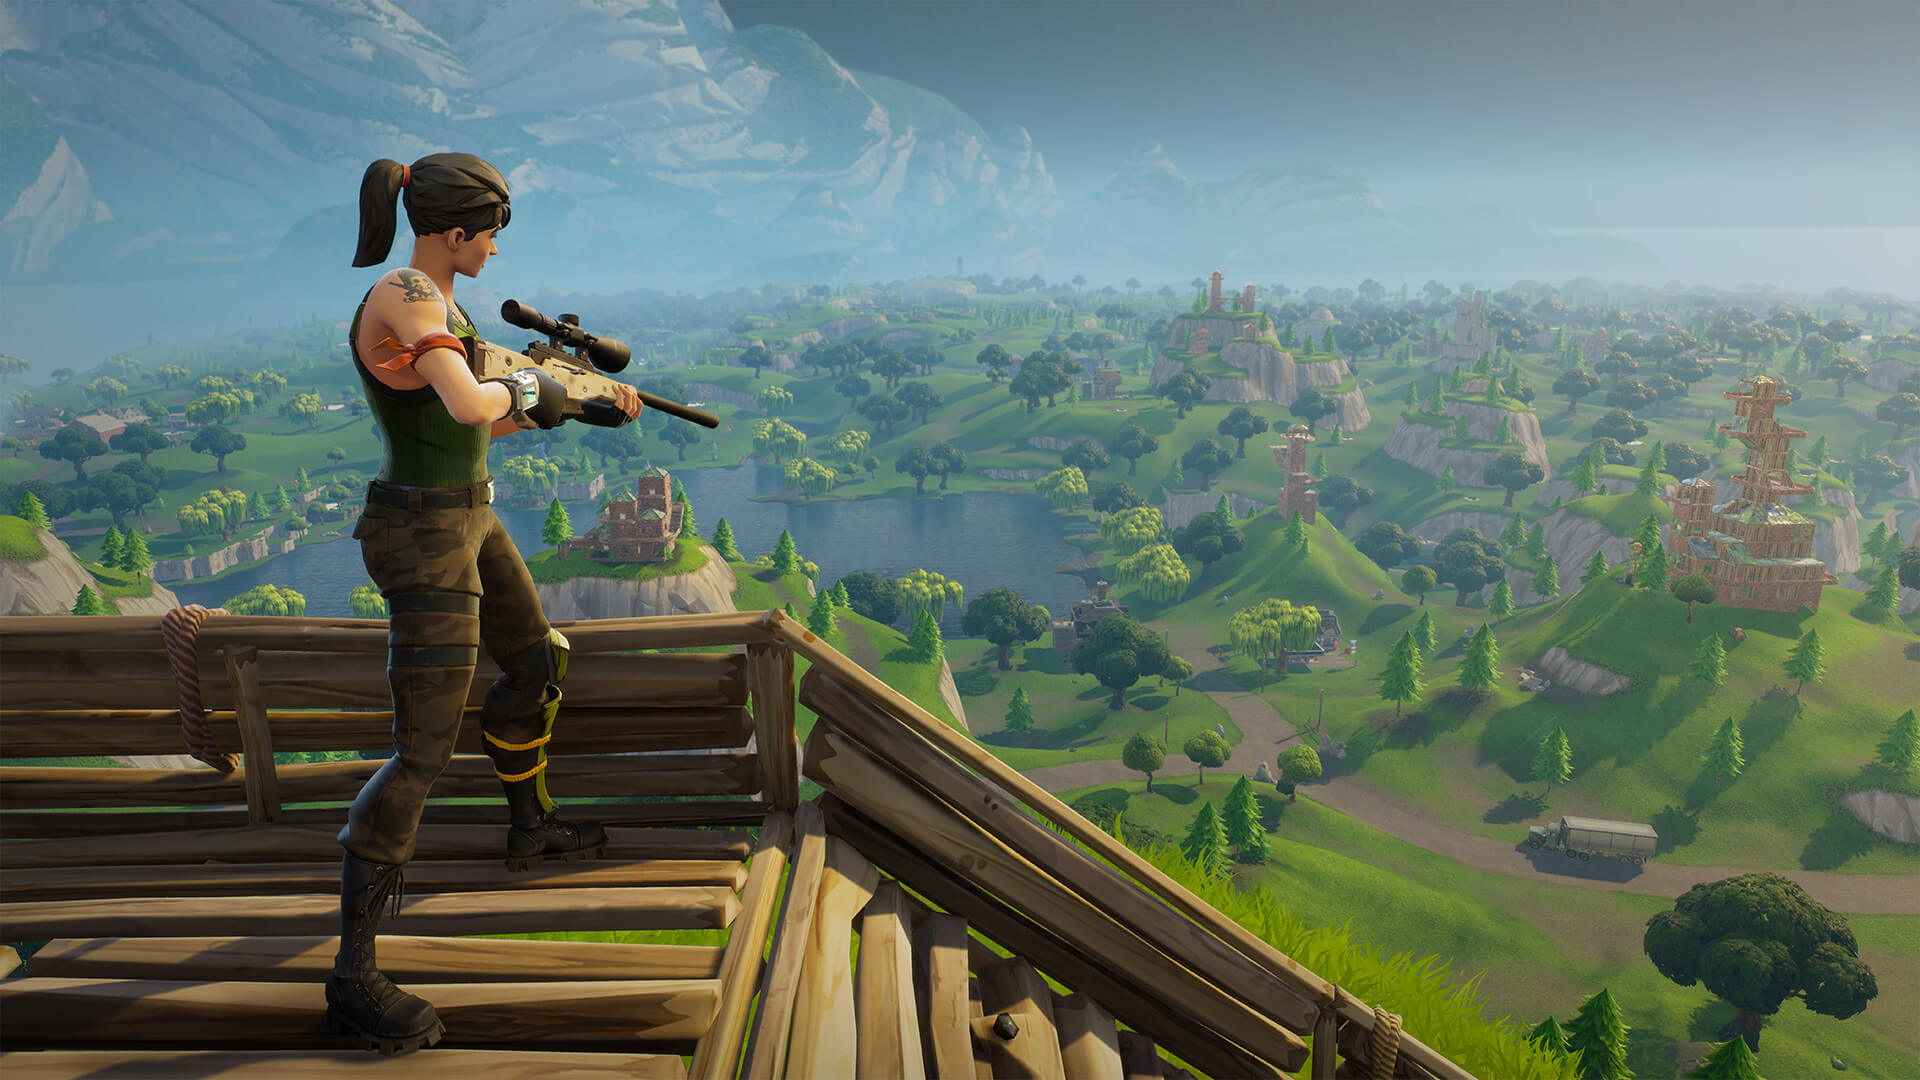 5 Incredible Ways Players Are Using the New Heavy Sniper in 'Fortnite